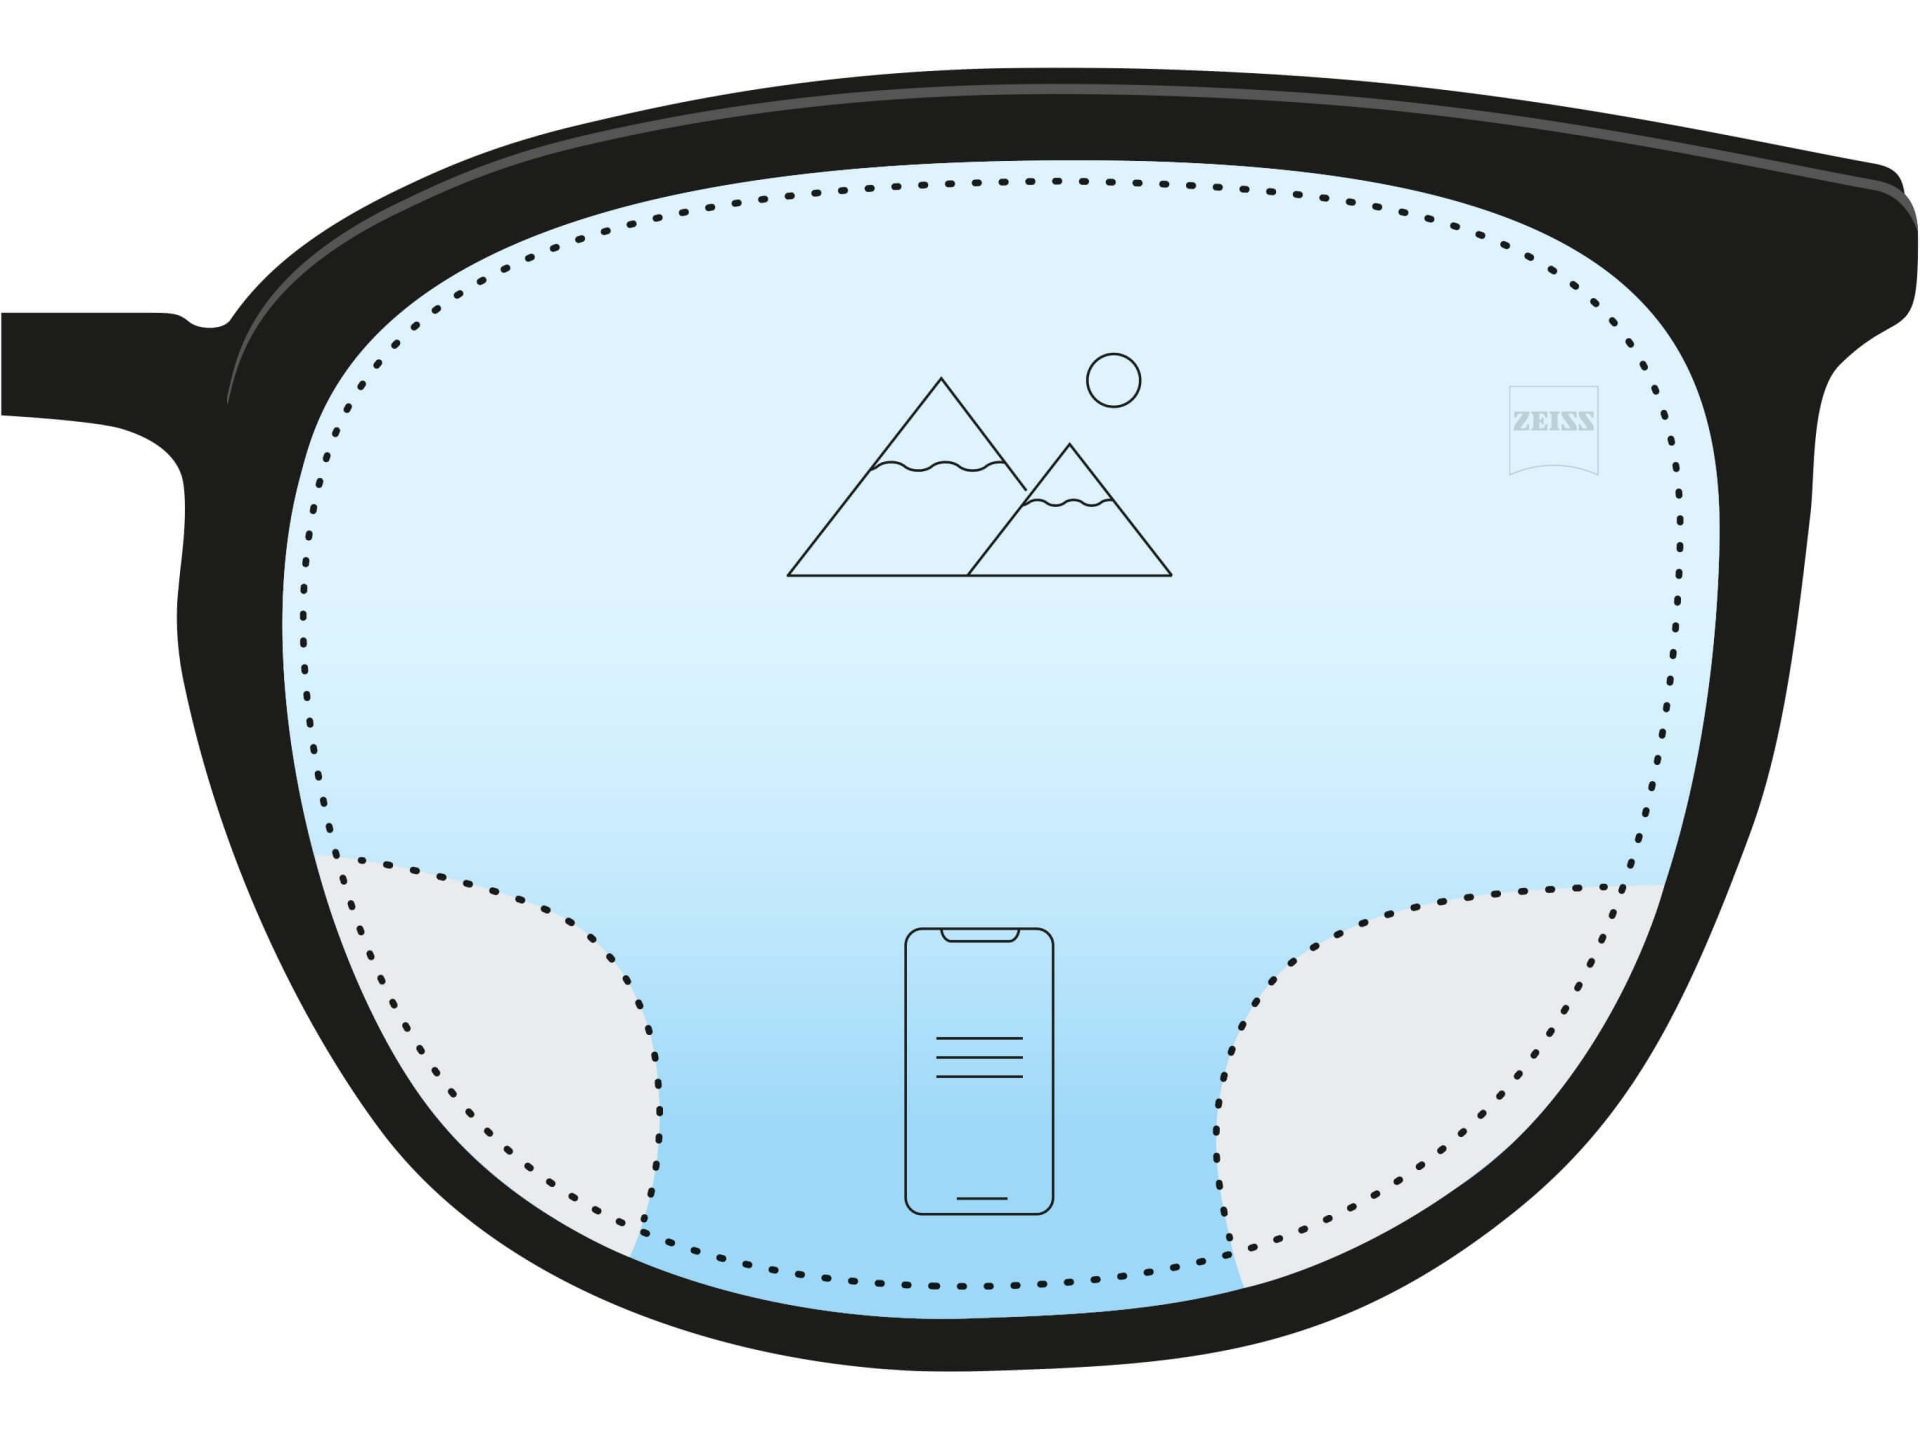 An illustration of an anti-fatigue lens. Two icons and a color gradient from dark blue at the bottom to light blue at the top indicate that the biggest area of the lens has a distance prescription, but that there is a small area at the bottom that helps with close-up vision.